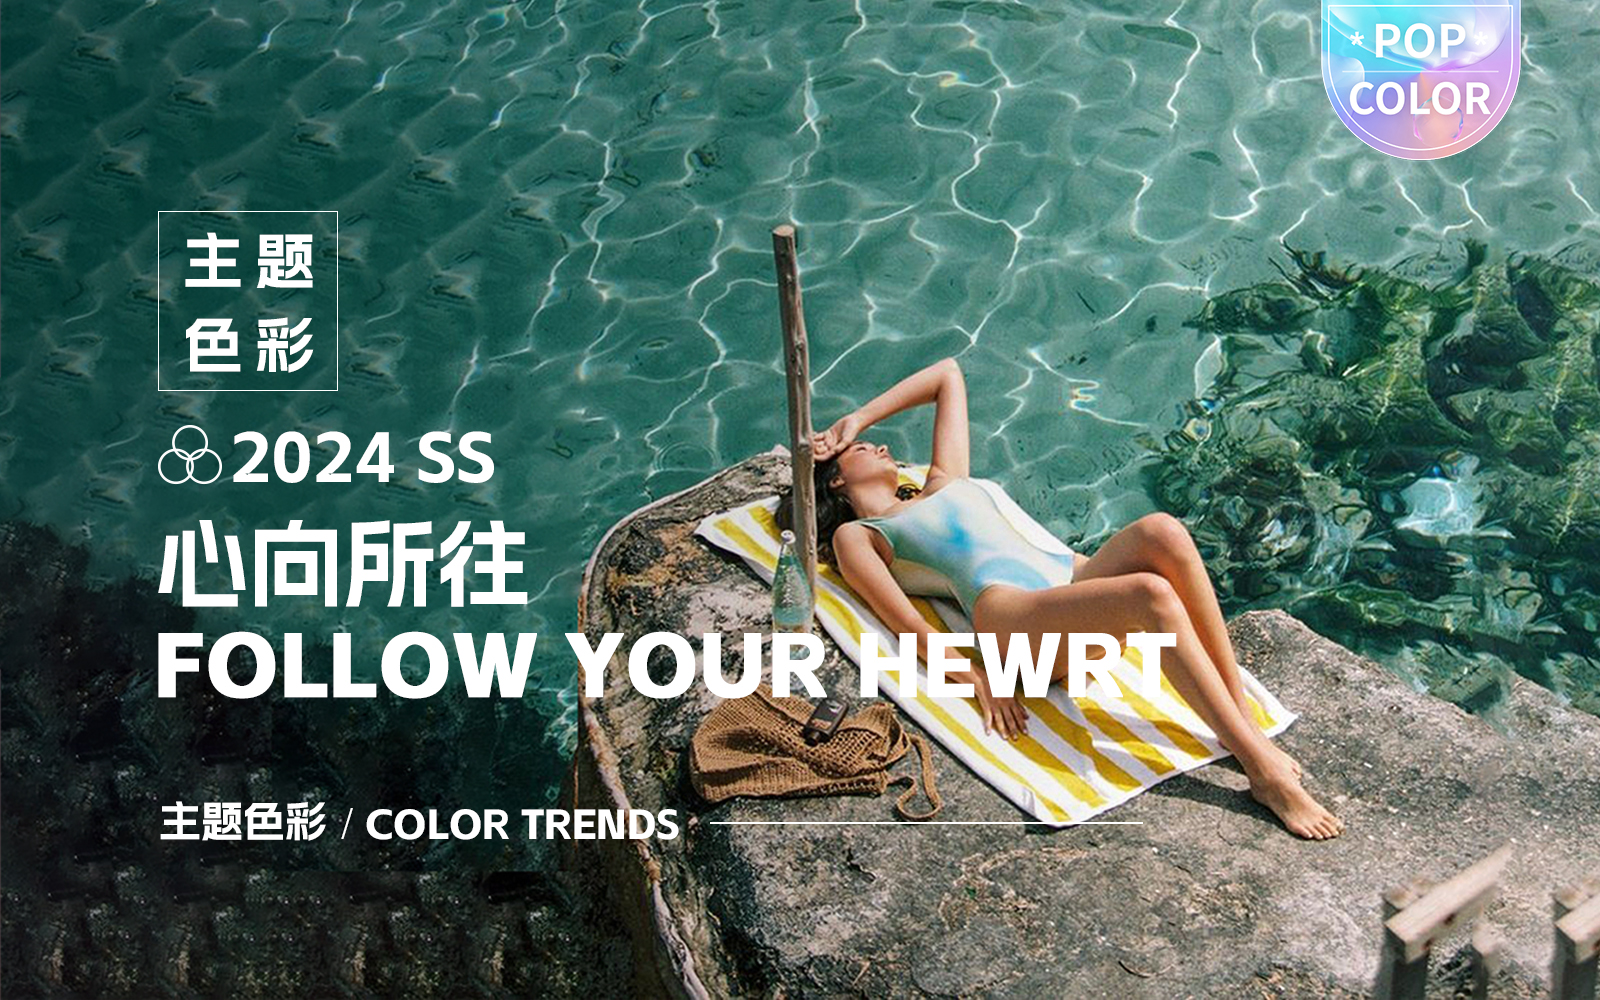 Follow Your Heart -- The Thematic Color Trend for Women's Swimwear